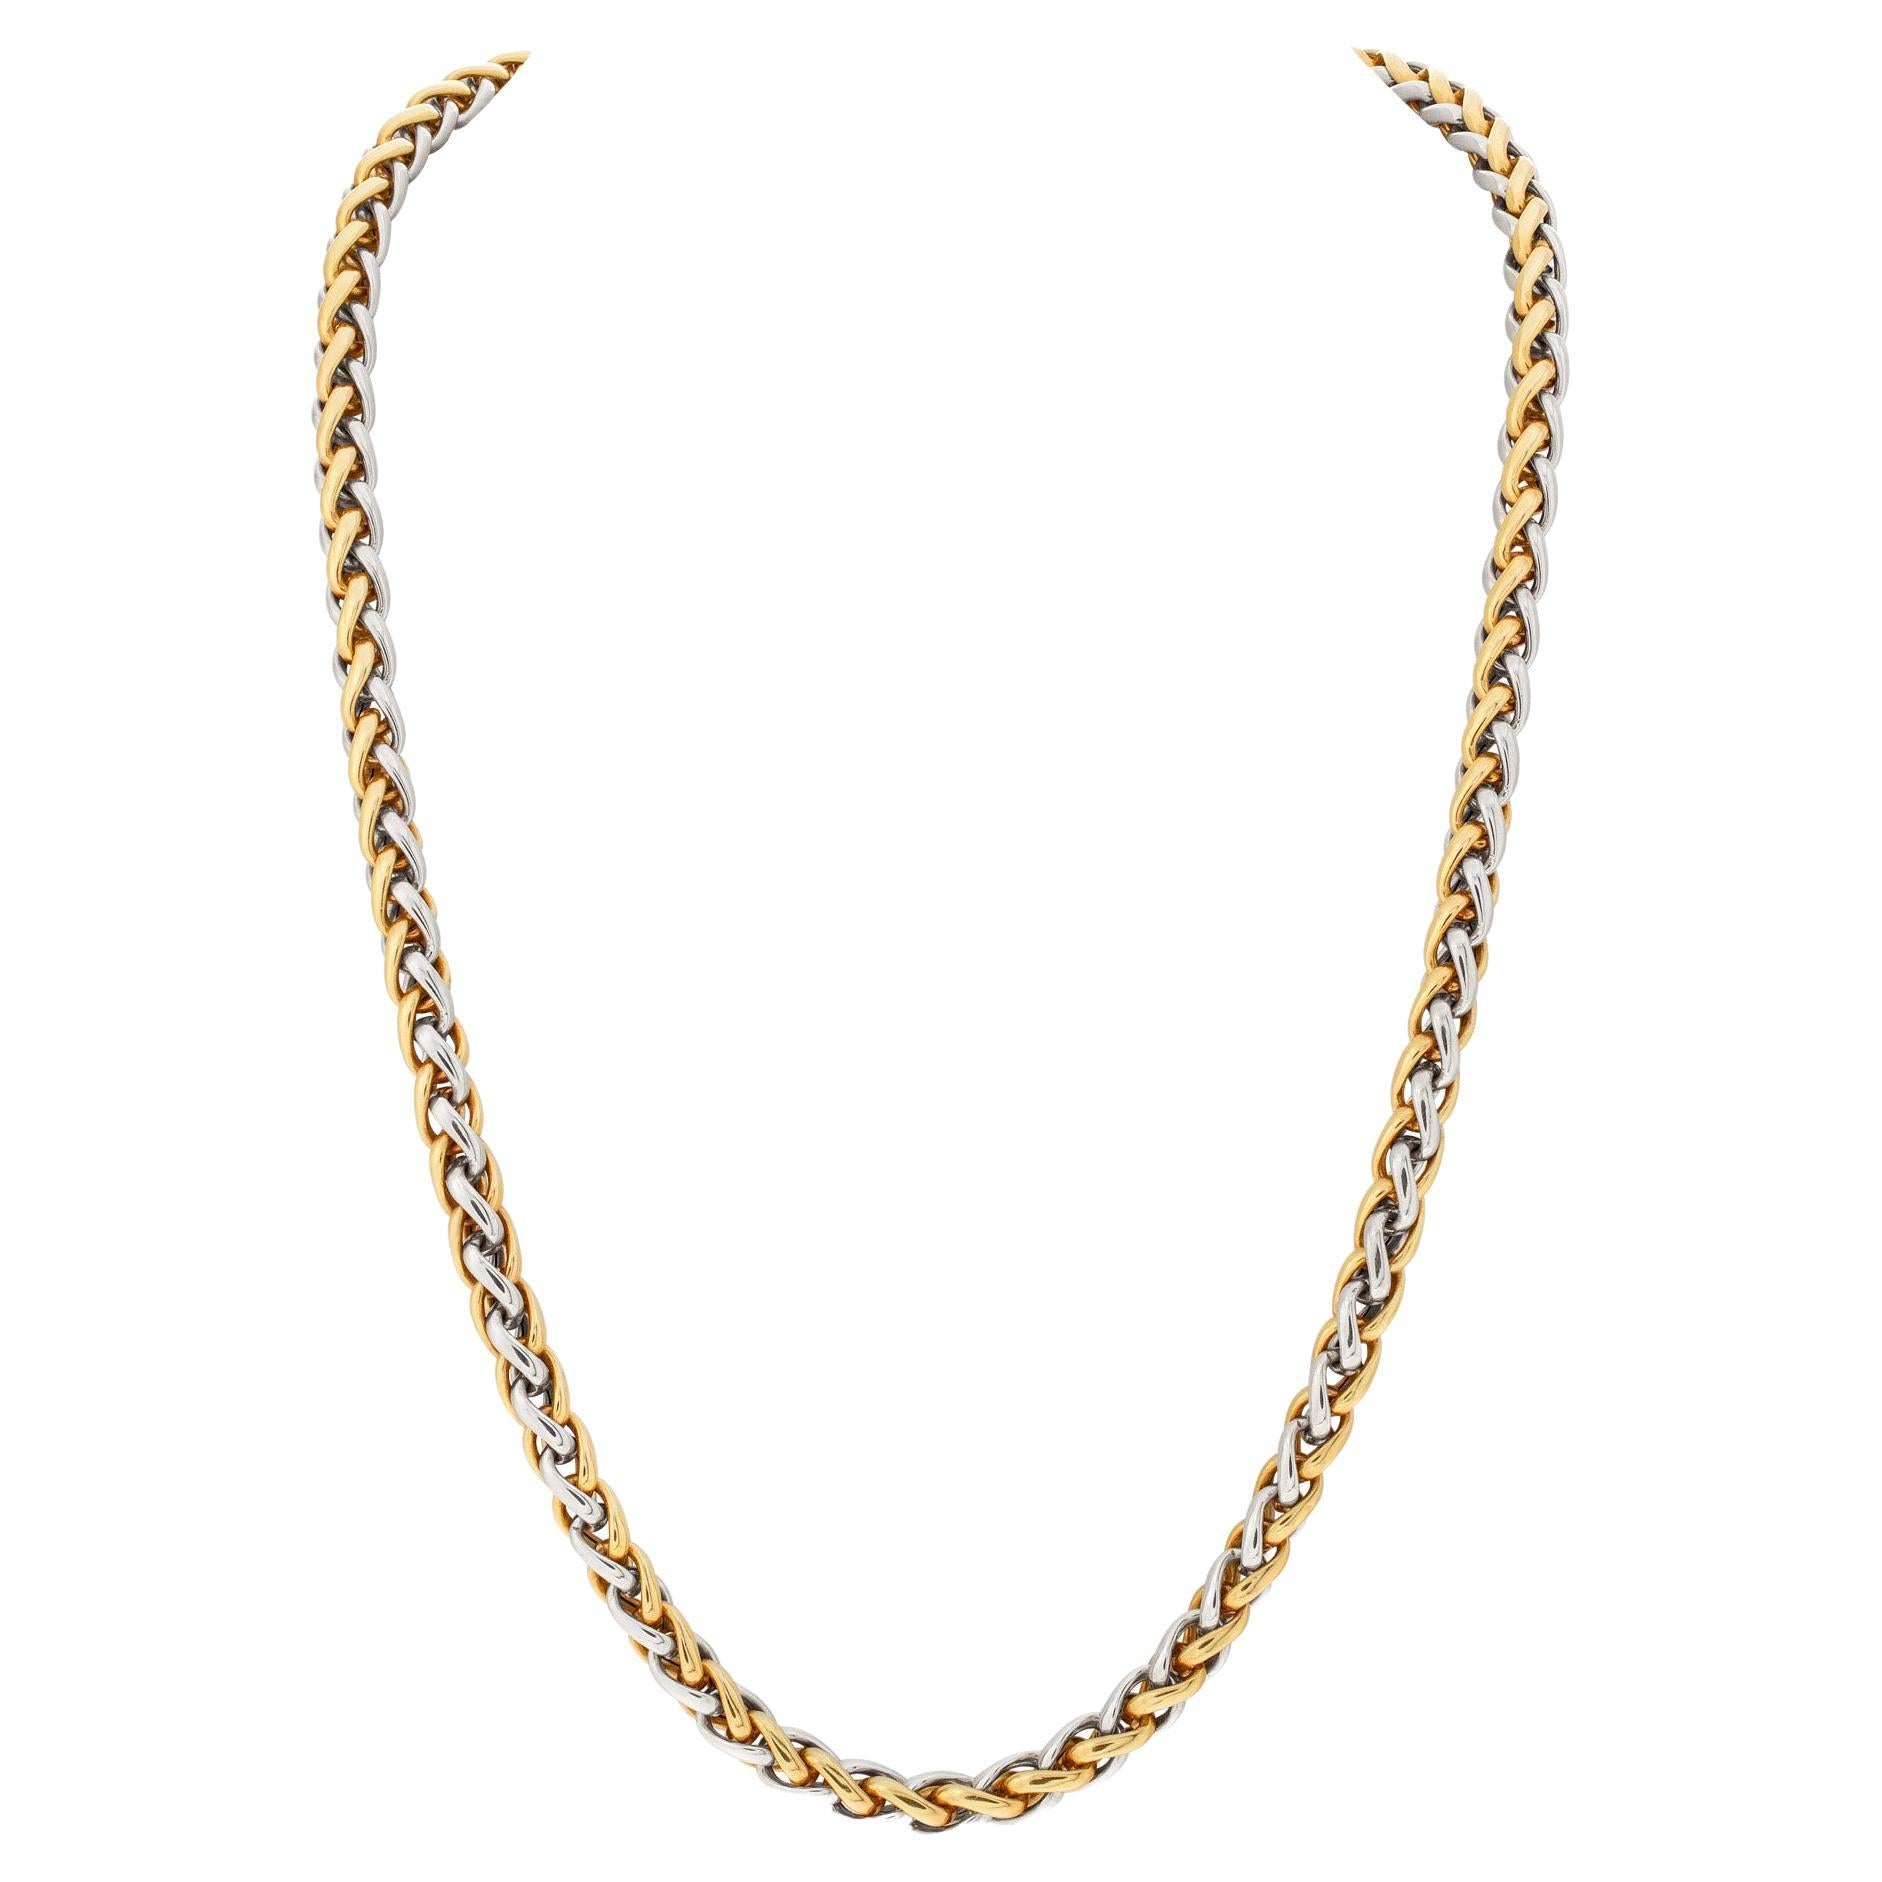 Long chain in 18k white and yellow gold - 30 inch length